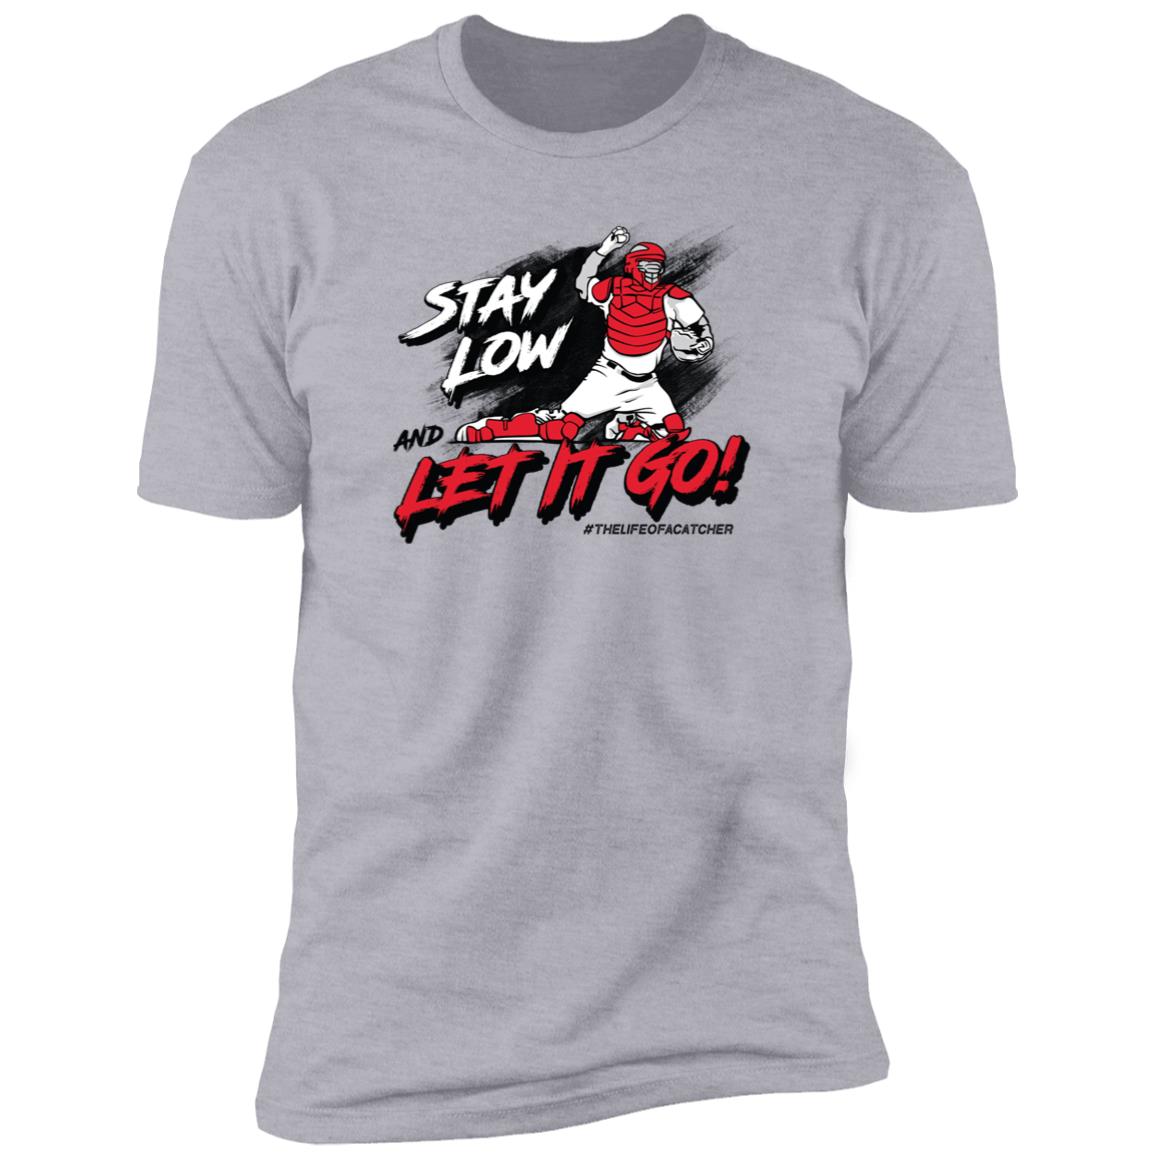 Stay Low & Let It Go Short Sleeve Tee - Grey